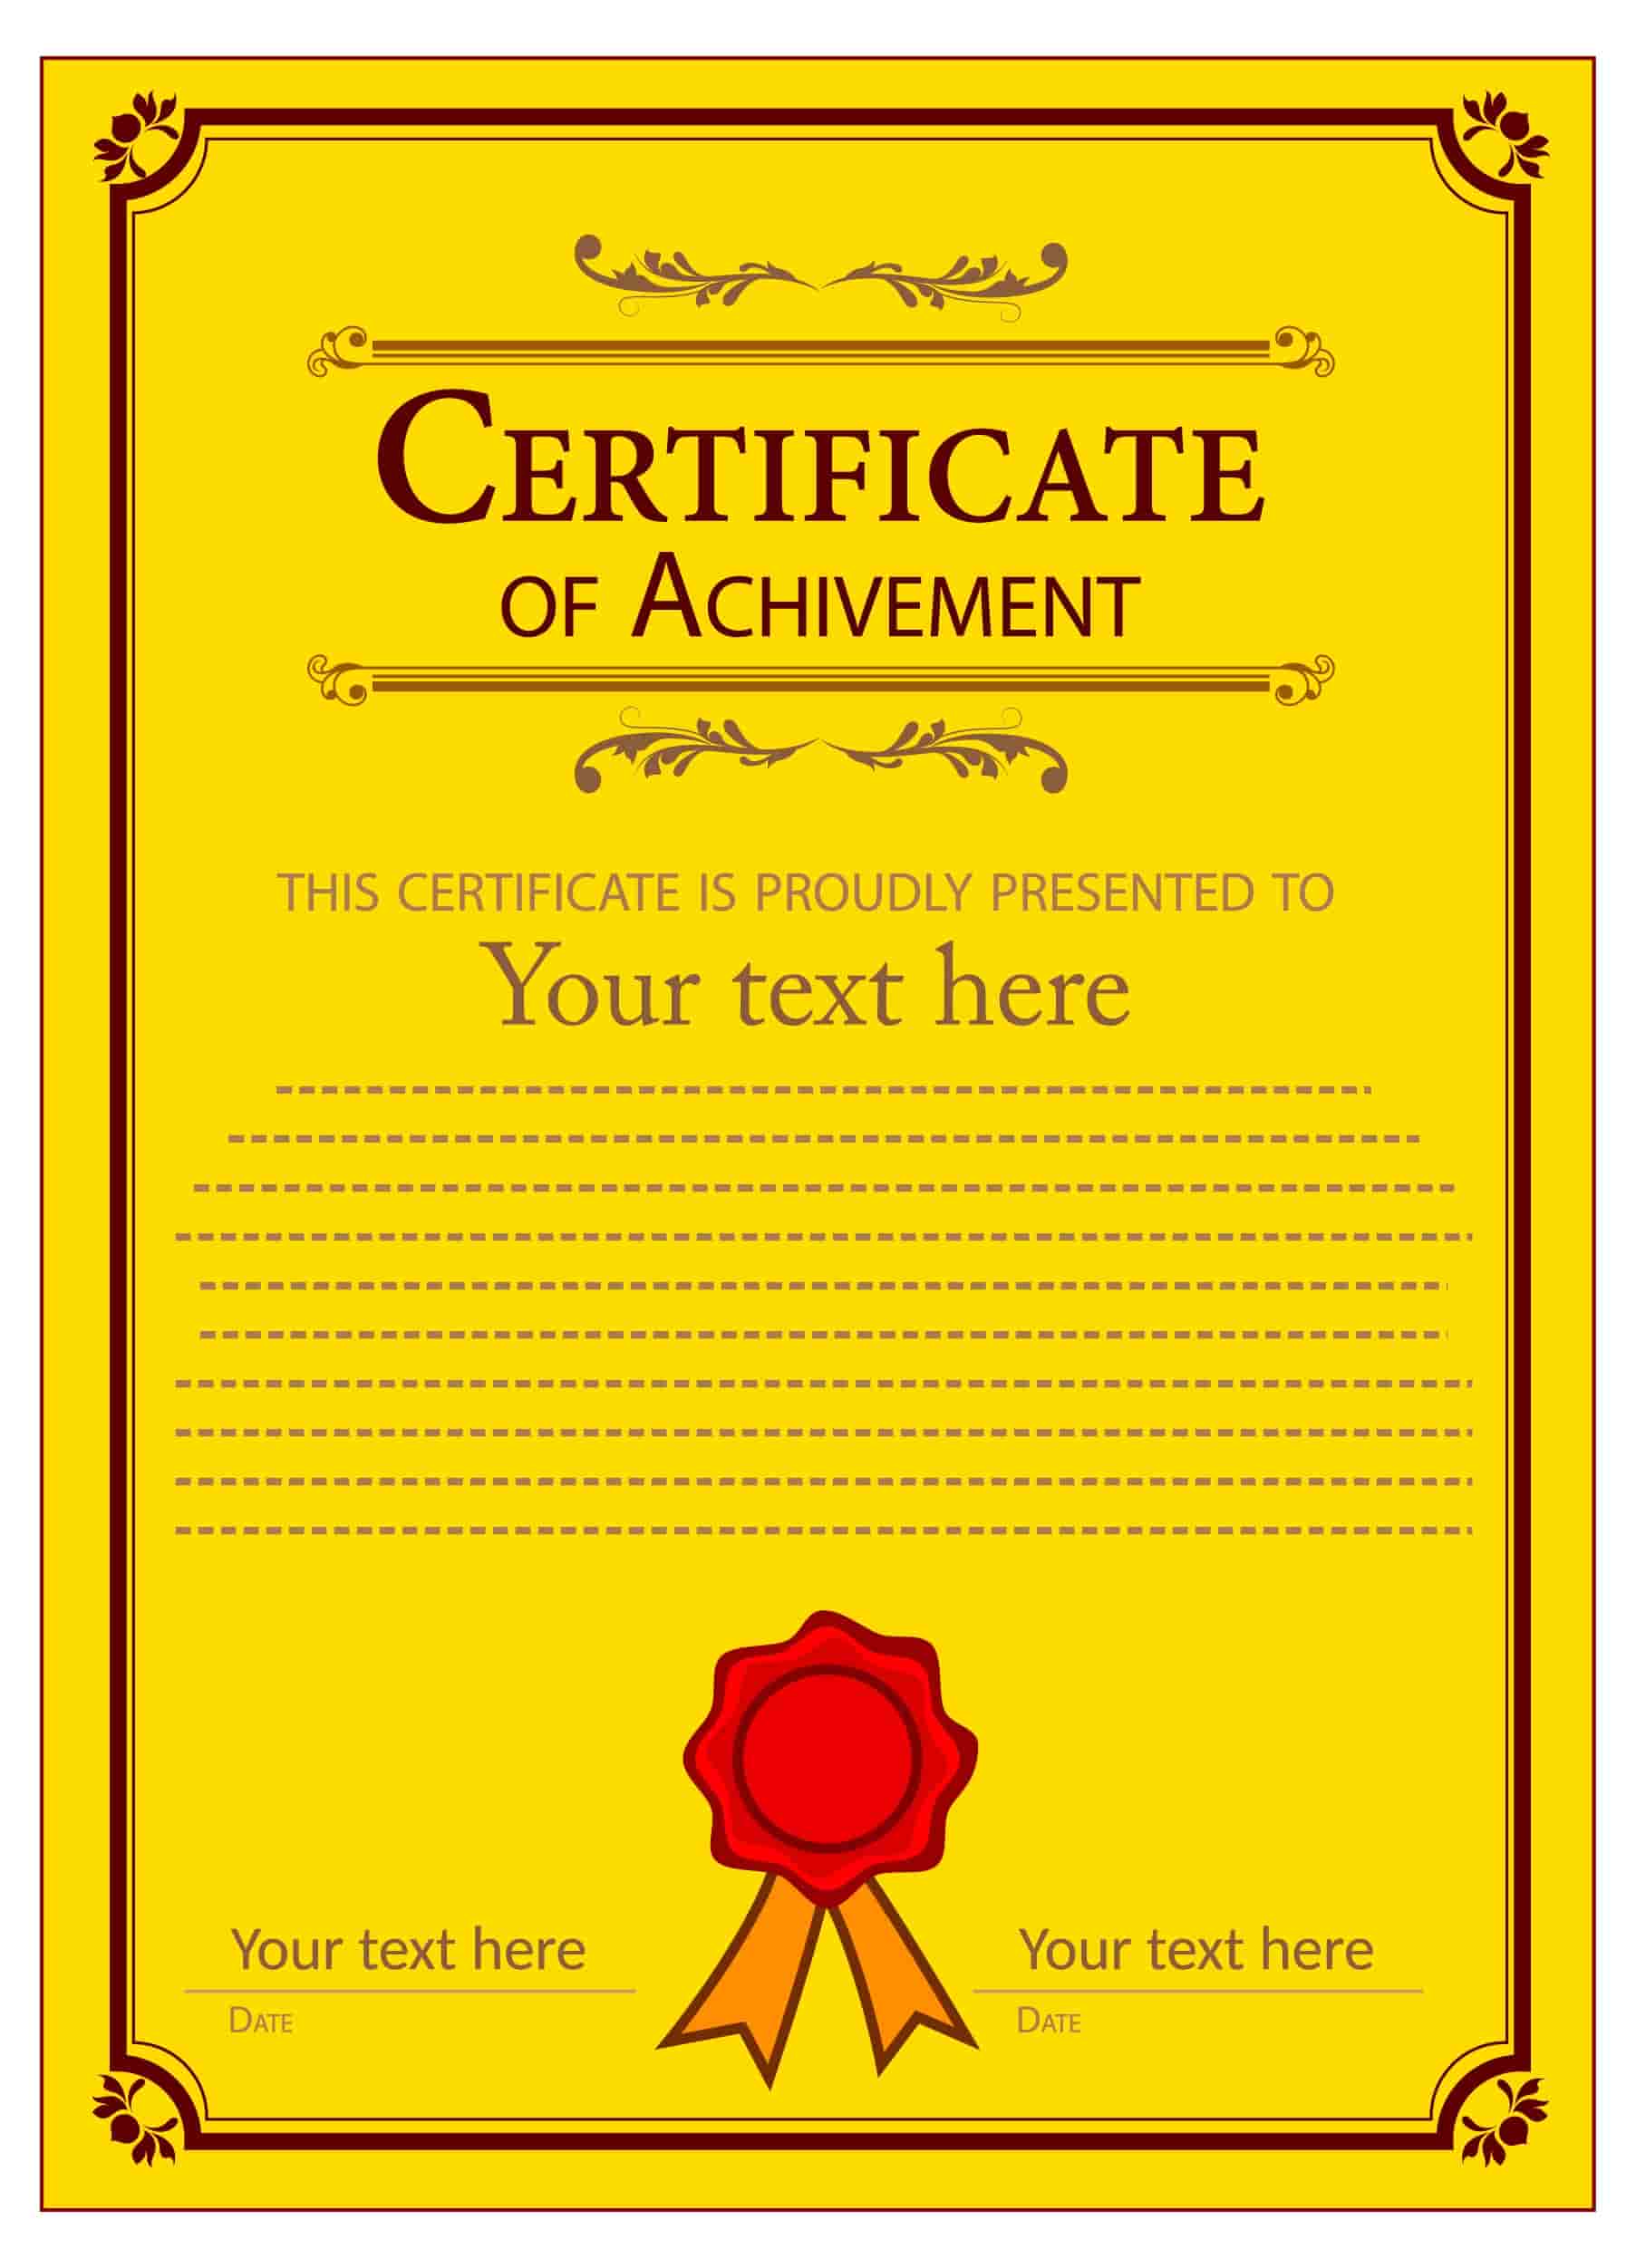 Achievement Certificate Desin In Classical Yellow Background Vector File